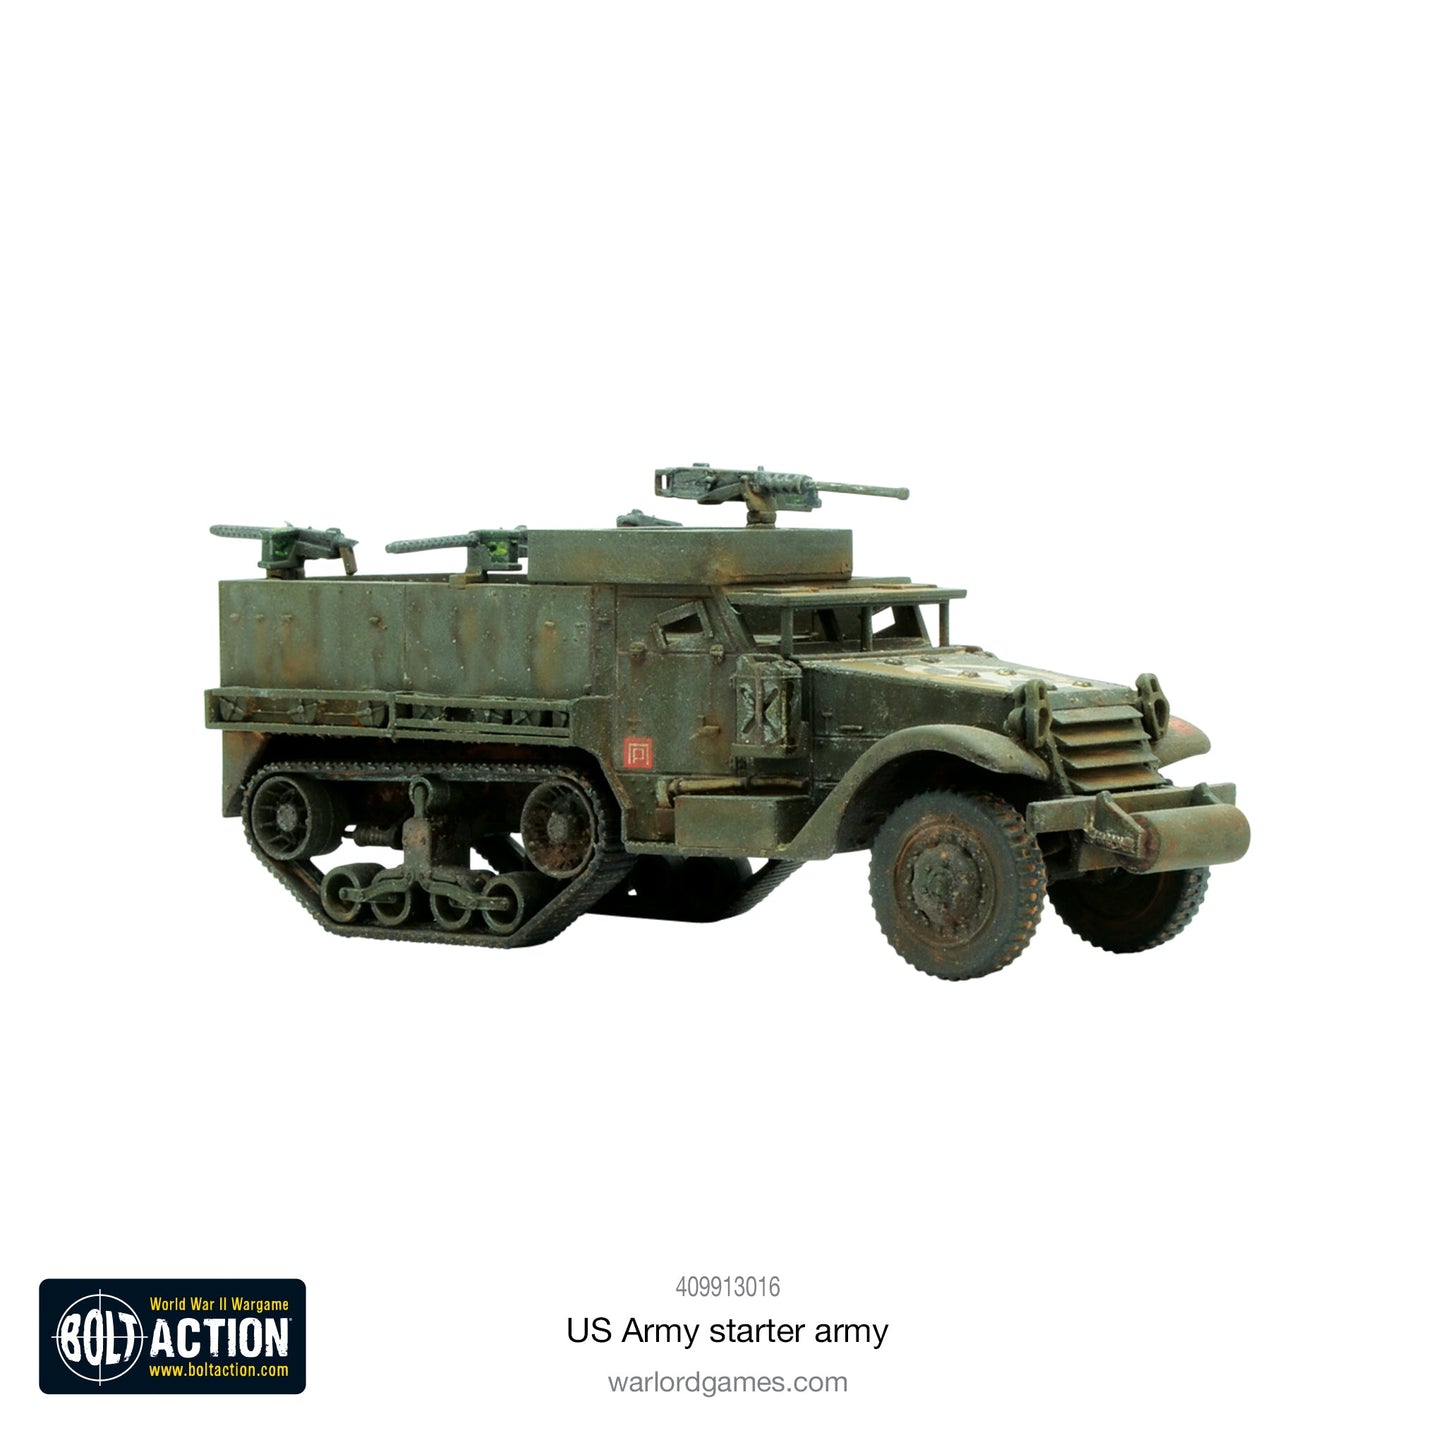 BOLT ACTION US Army starter army 2019